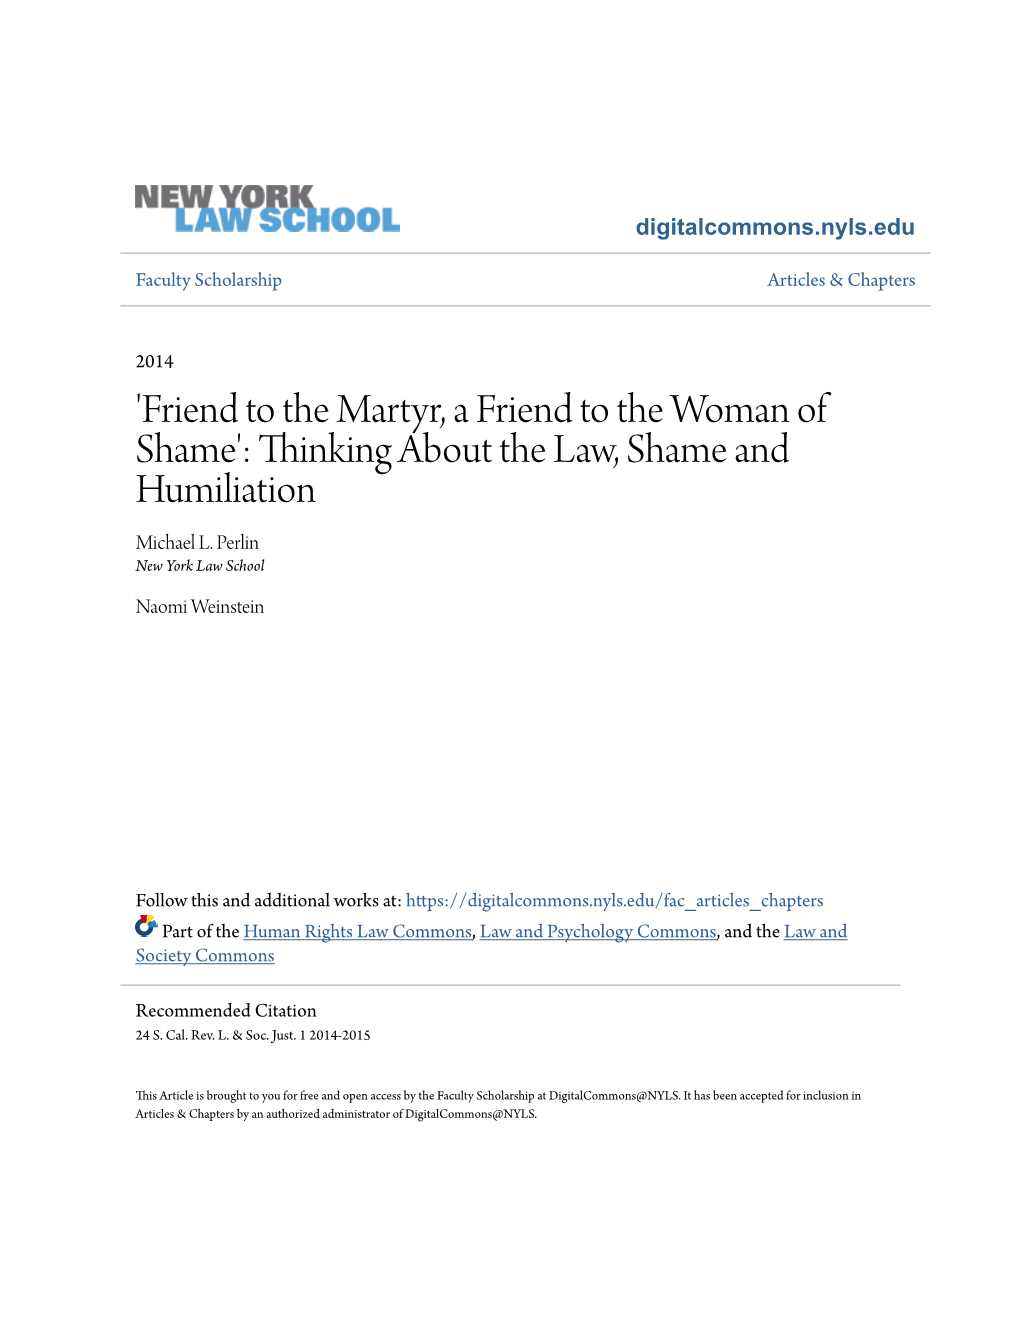 Friend to the Martyr, a Friend to the Woman of Shame': Thinking About the Law, Shame and Humiliation Michael L